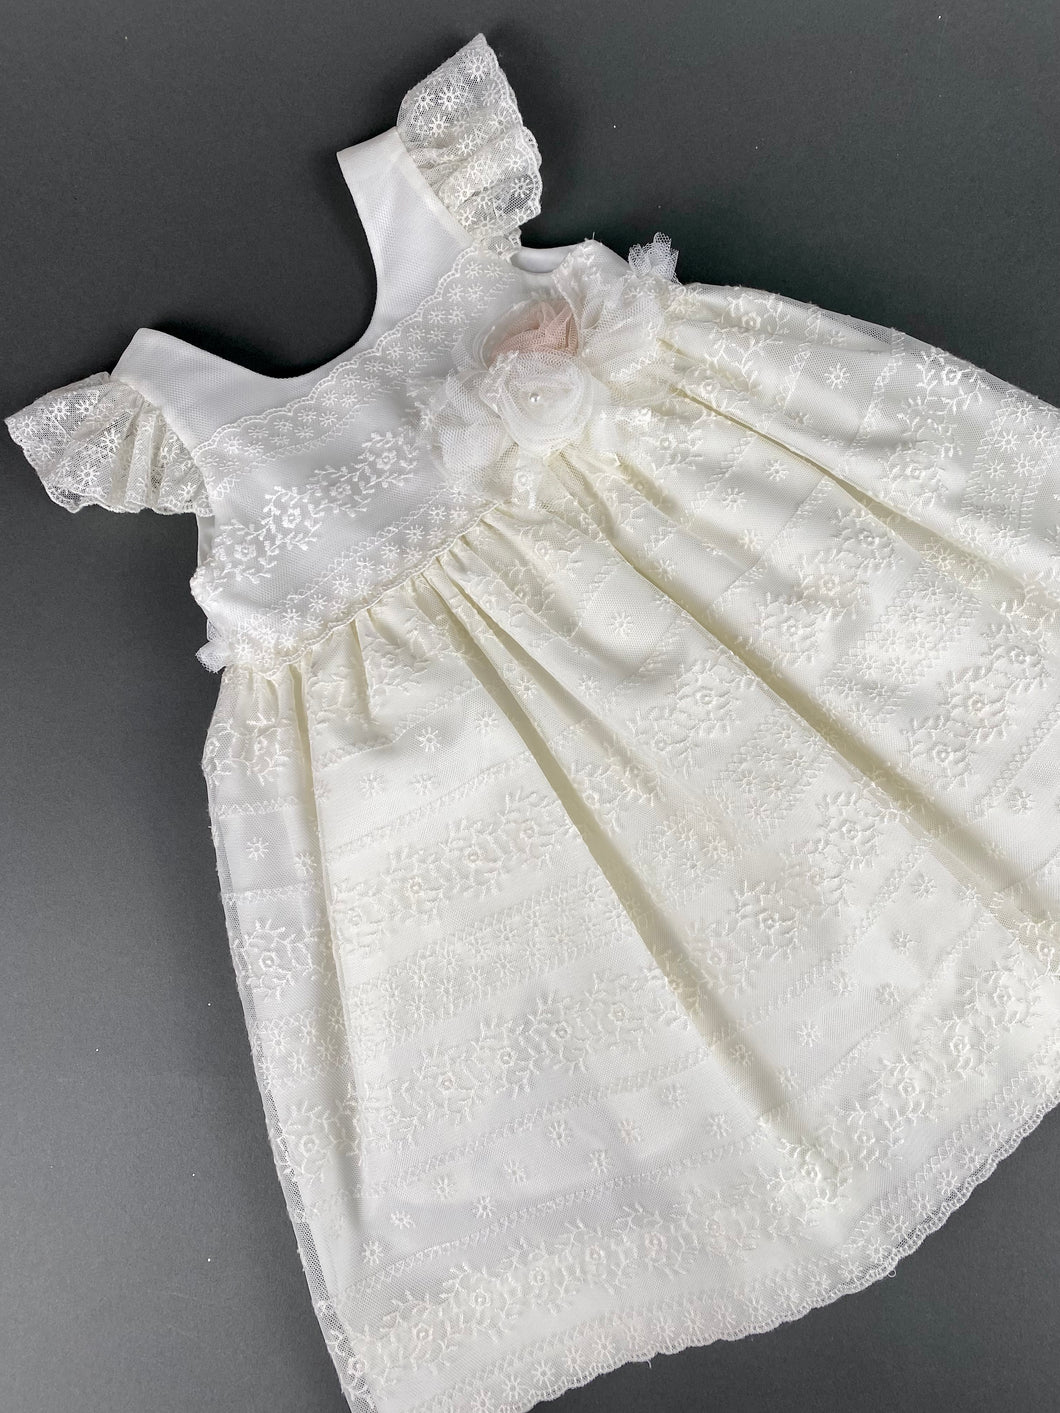 Dress 67 Girls Baptismal Christening Embroidered French Lace with Cap Sleeves, matching Bolero and Hat. Made in Greece exclusively for Rosies Collections